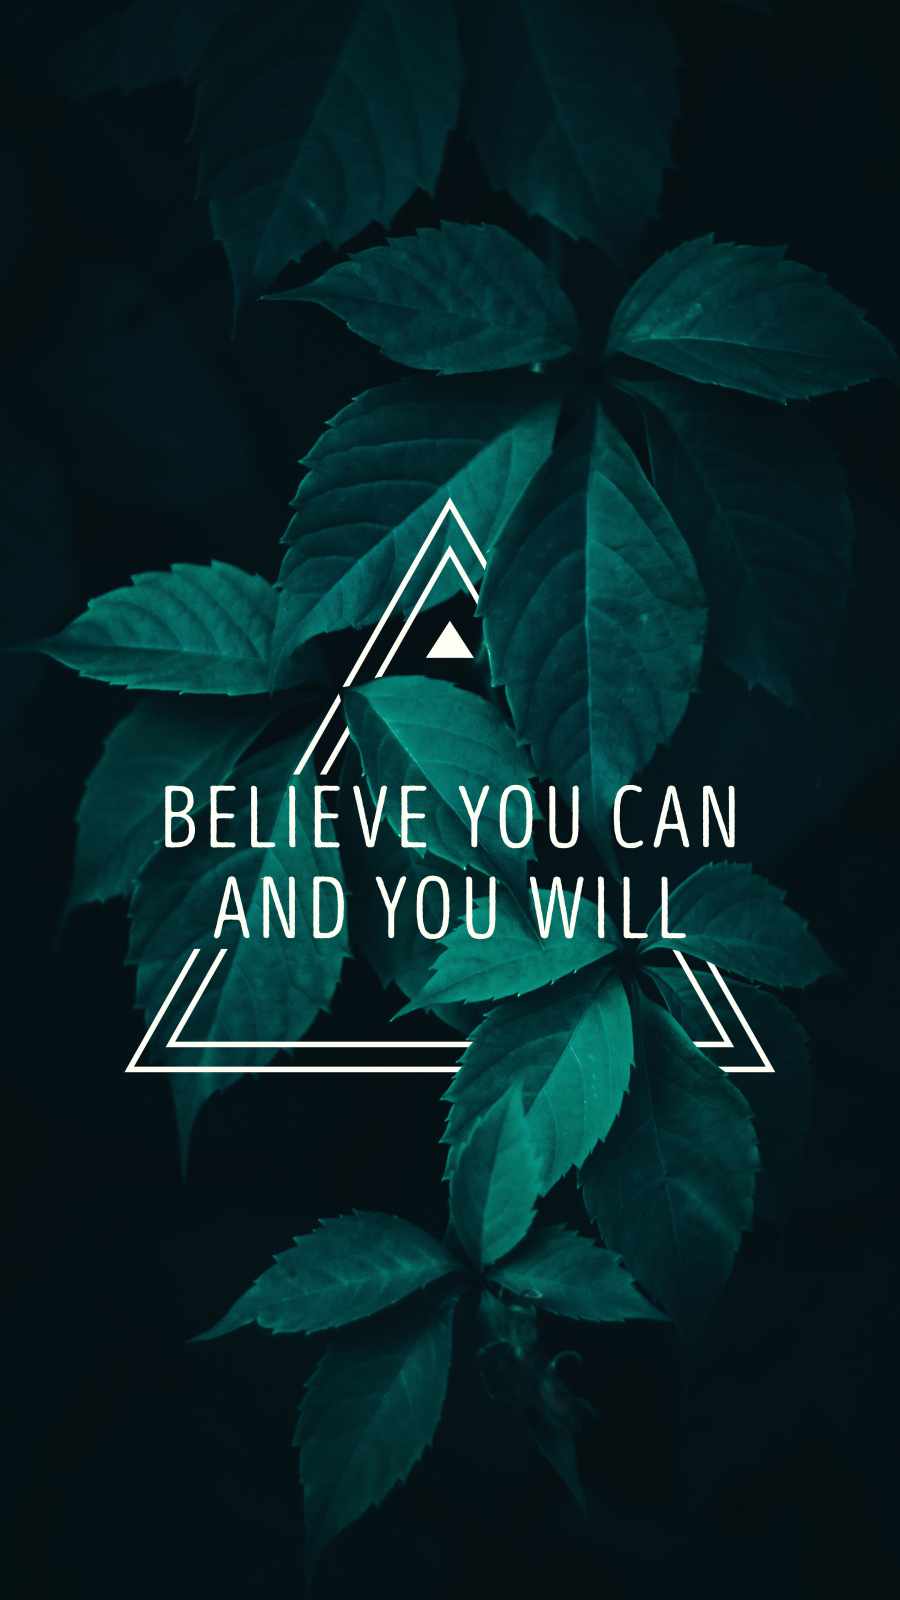 Believe You Can And You Will - IPhone Wallpapers : iPhone Wallpapers